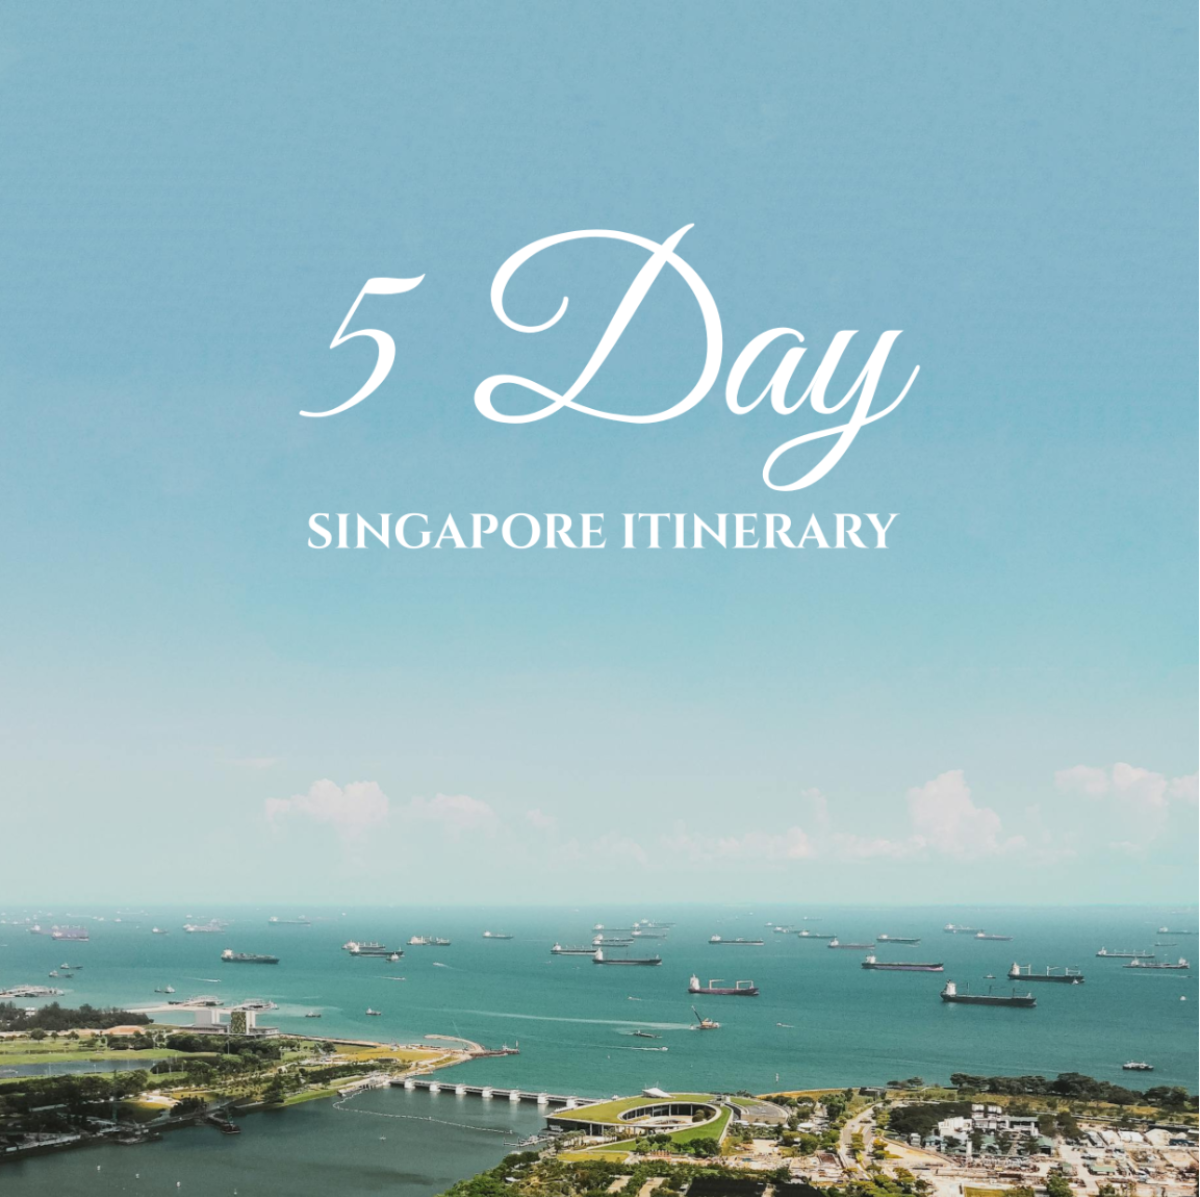 5 Day Singapore Itinerary Template